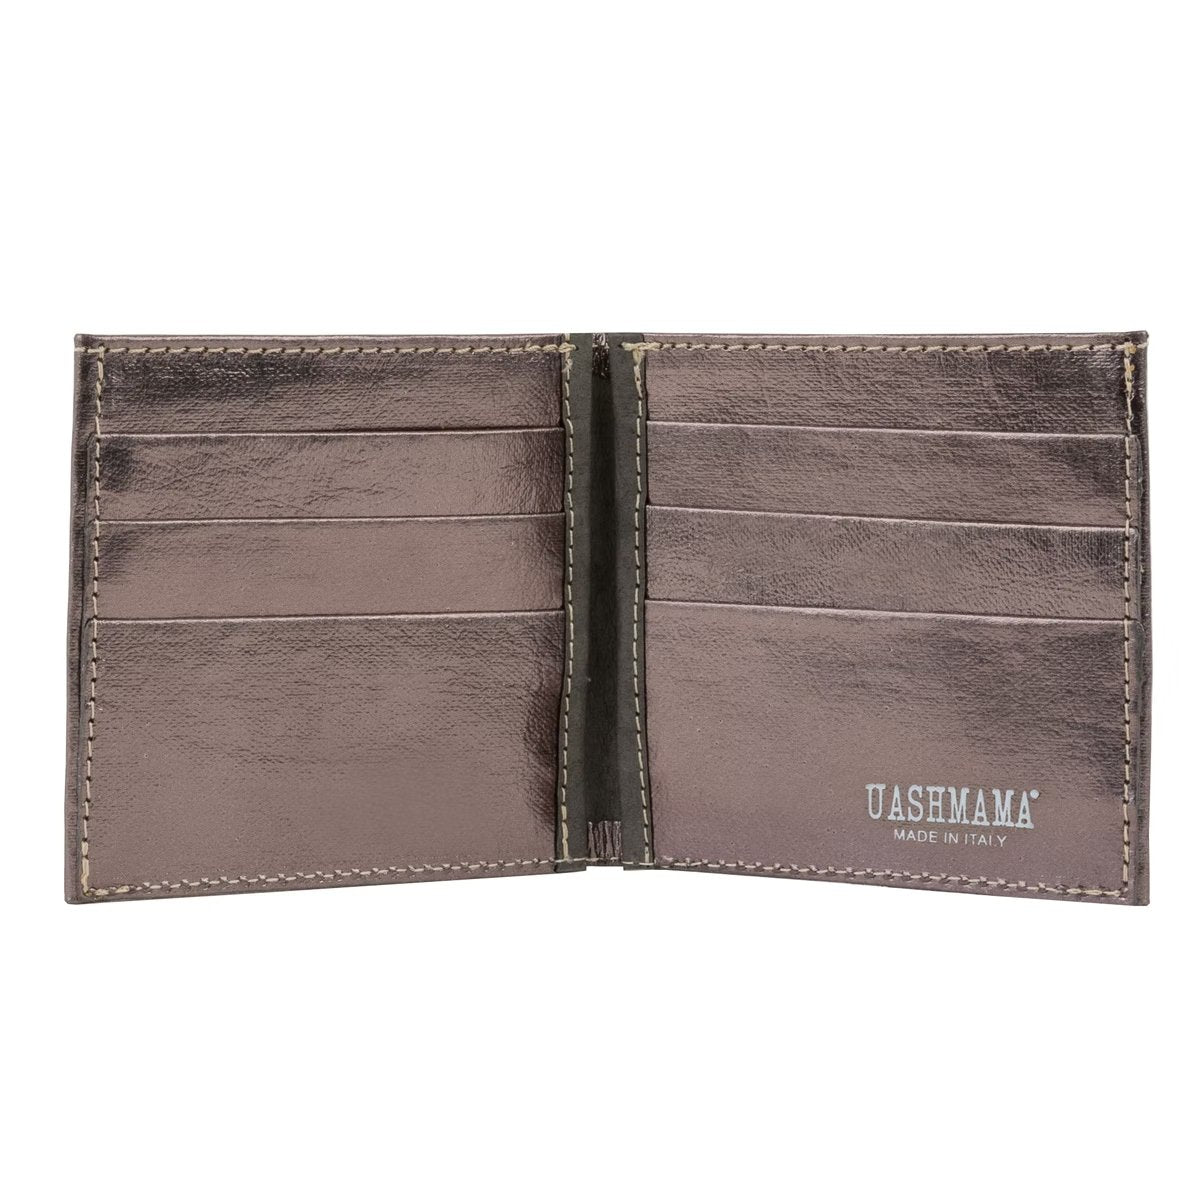 A small 8 slot washable paper wallet is shown open. The UASHMAMA logo is printed on the bottom right hand corner of the image. The wallet is dark grey metallic in colour.